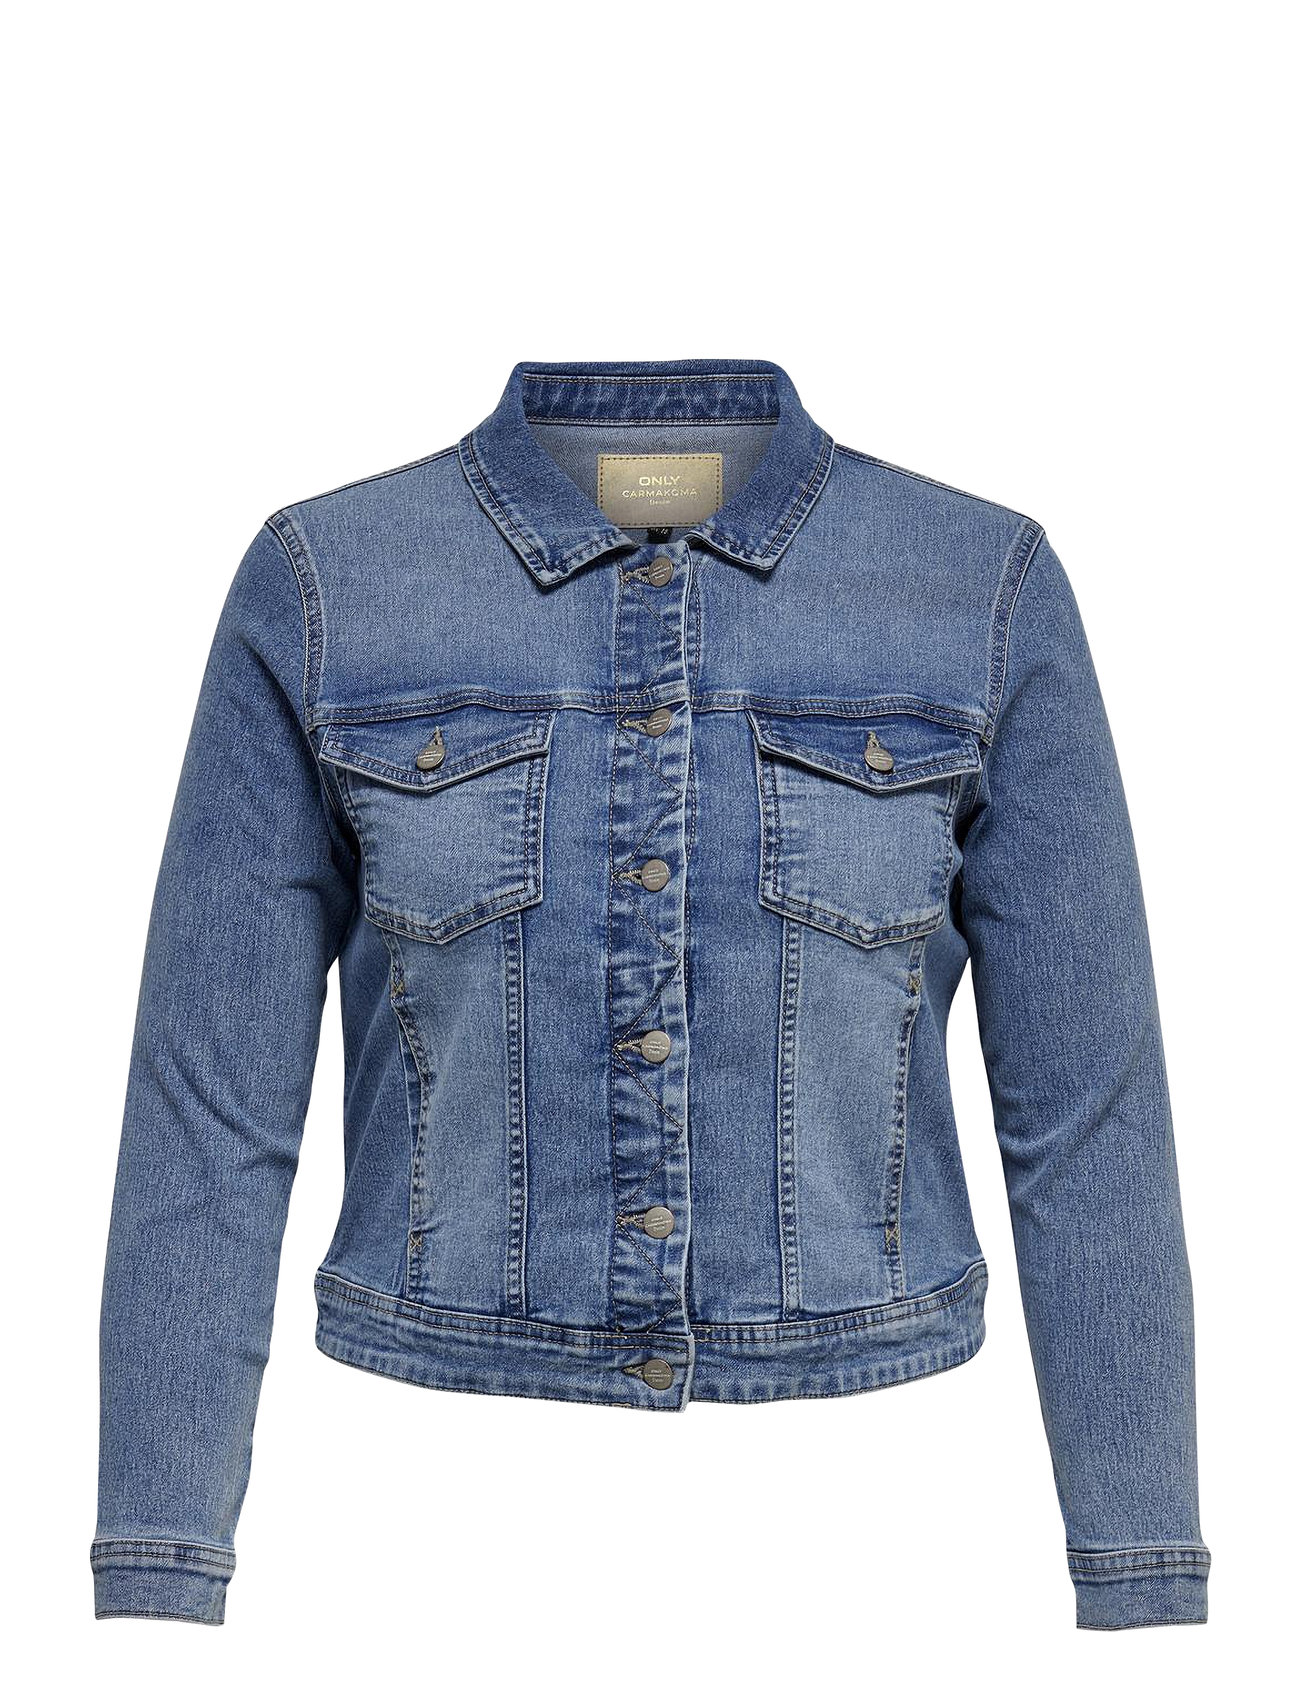 Blue 38.24 €. Boozt.com. at easy Dnm - Carmakoma returns Buy ONLY Light from Fast delivery and Carwespa ONLY Carmakoma Ls Jacket Denim jackets online Noos